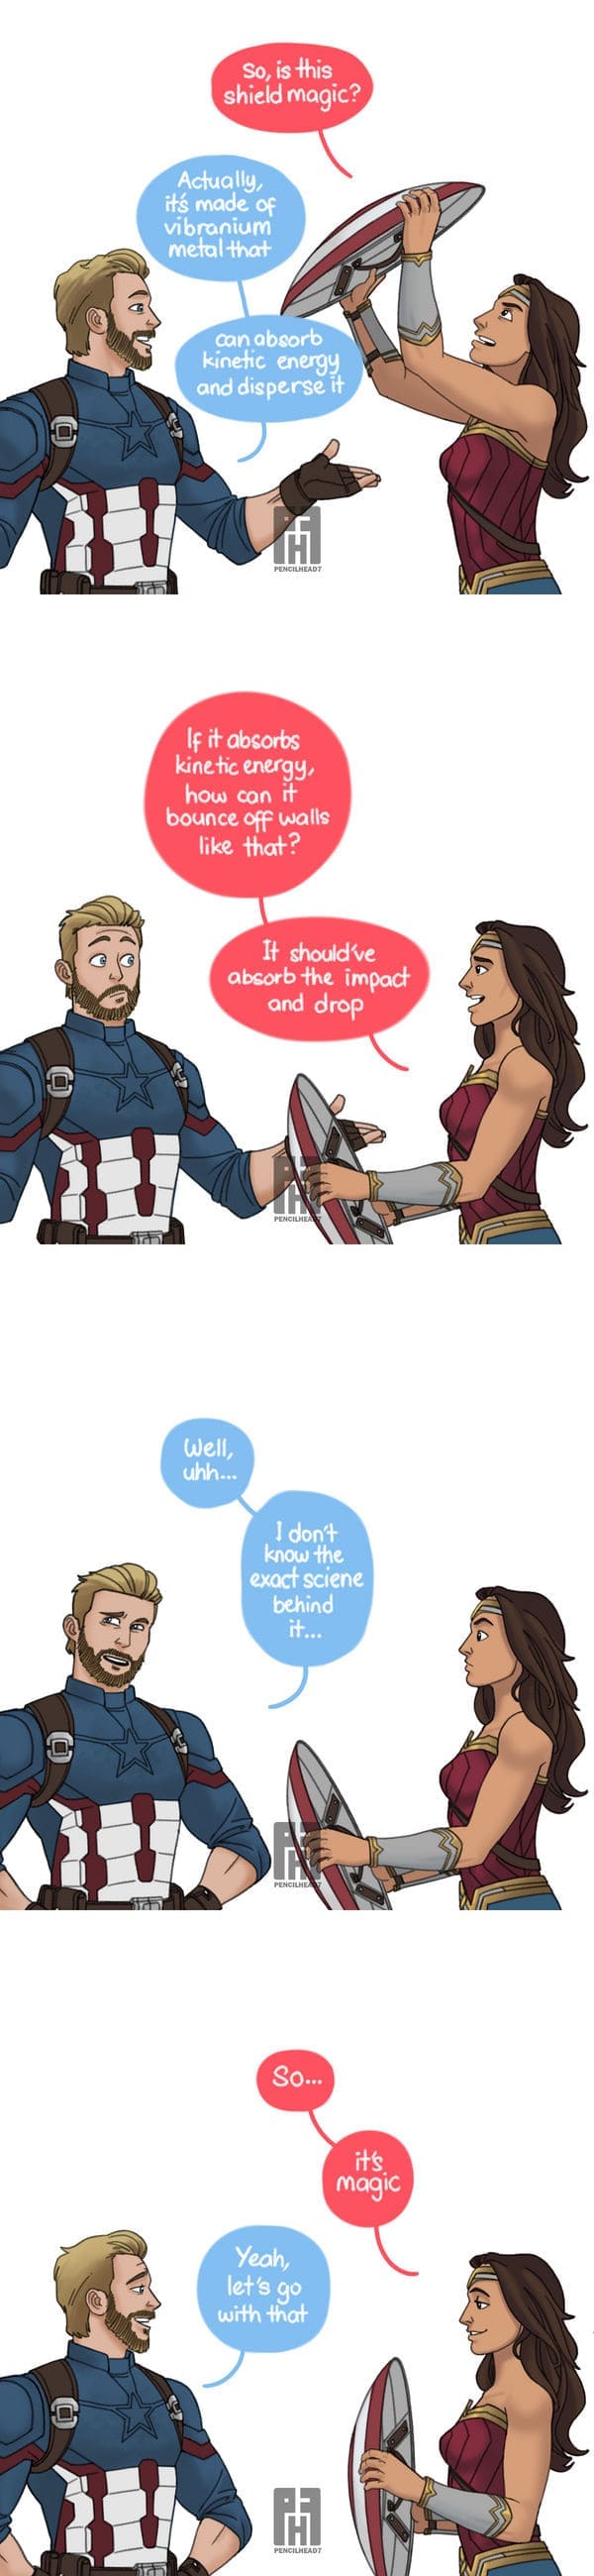 Adorable Mcu Fan Comic That Leaves Us 5 -20 Adorable Mcu Fan Comics That Leaves Us Laughing Harder Than We Could